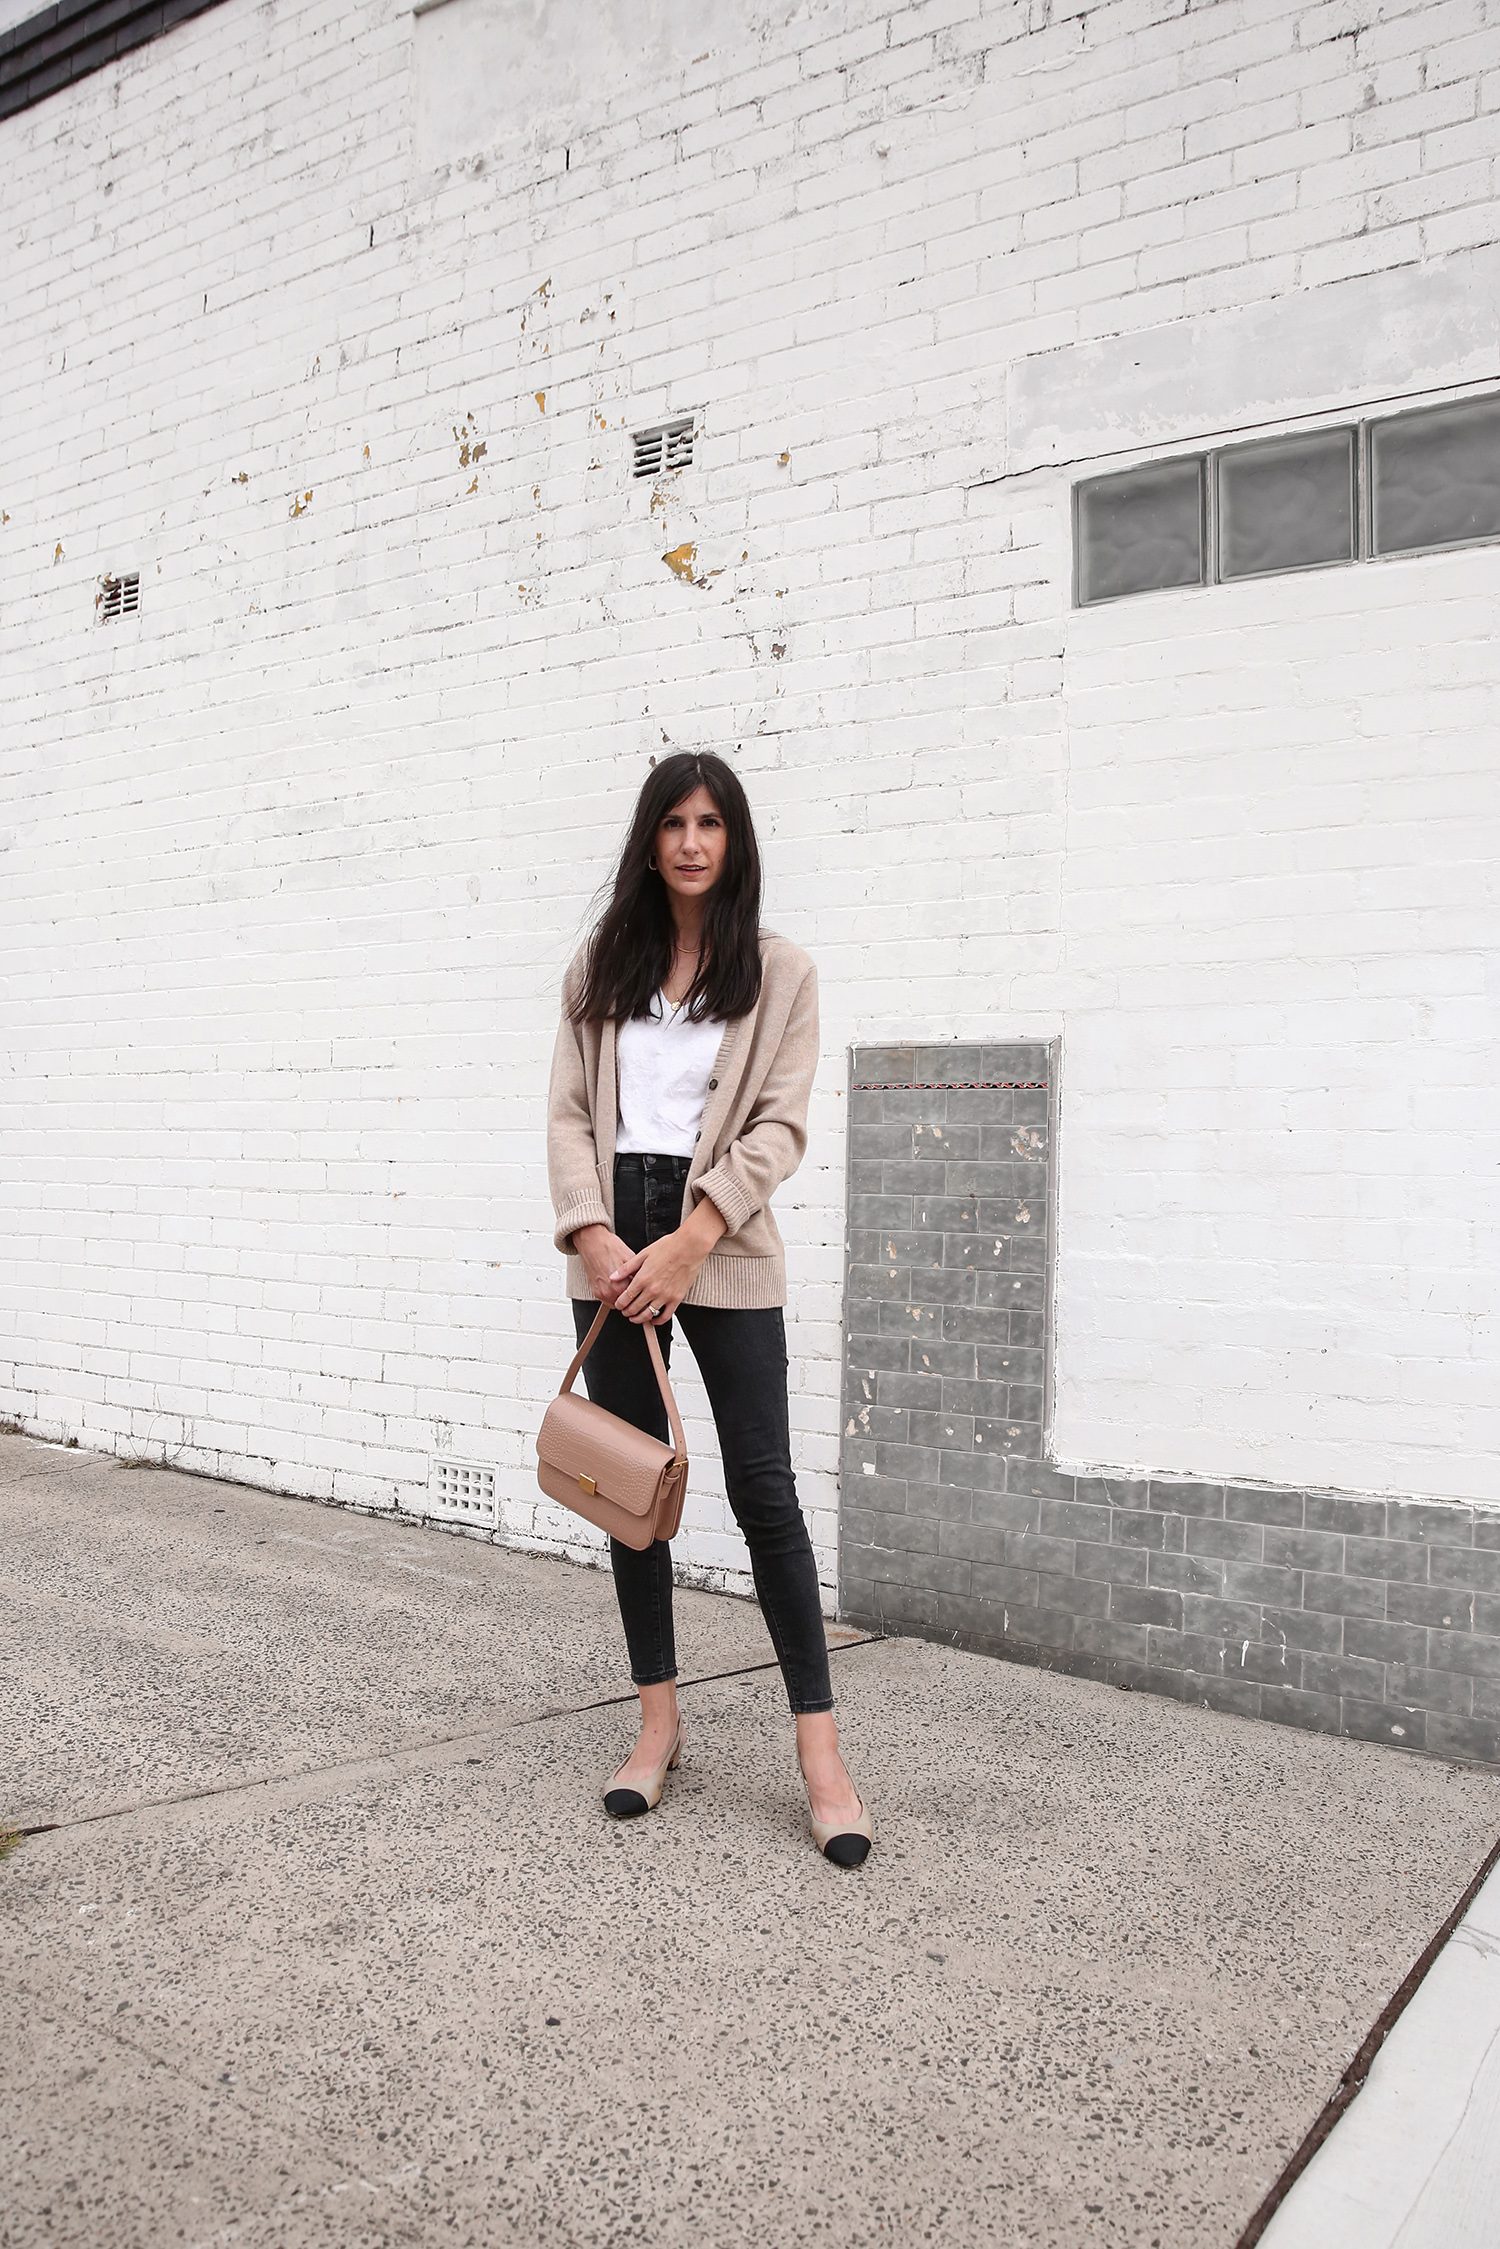 Simple mom style outfit neutral tones